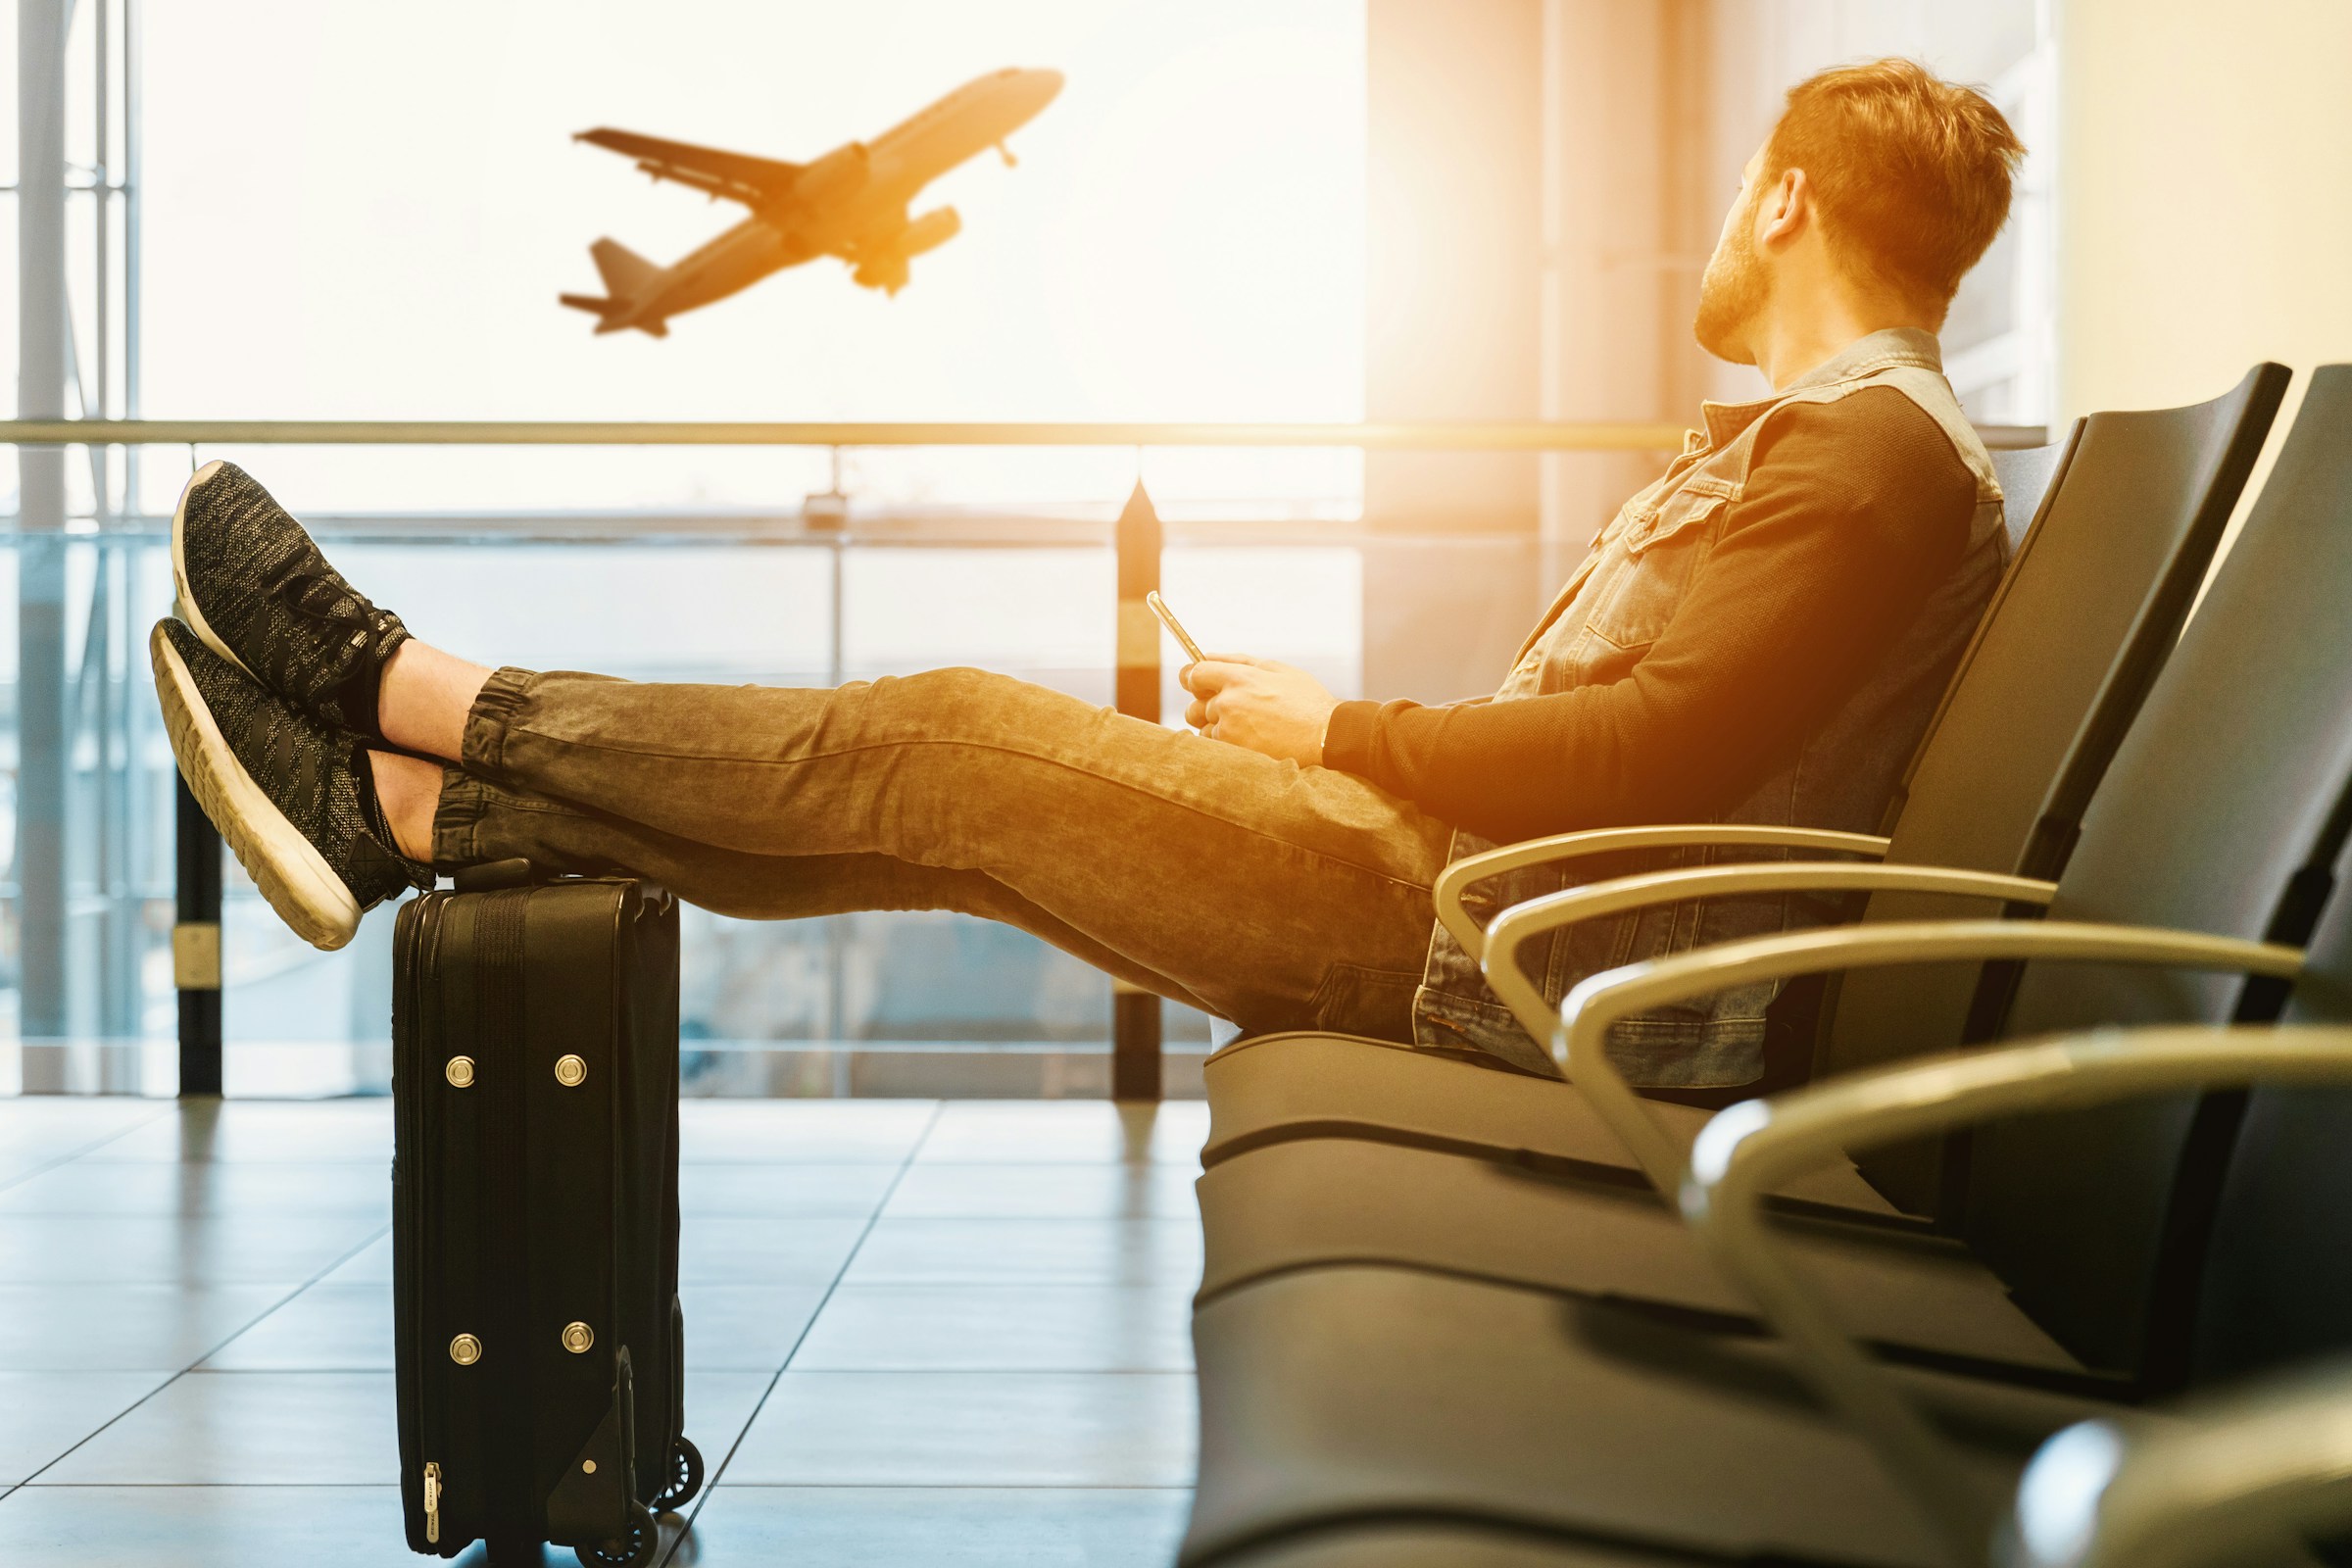 A man in an airport | Source: Pexels